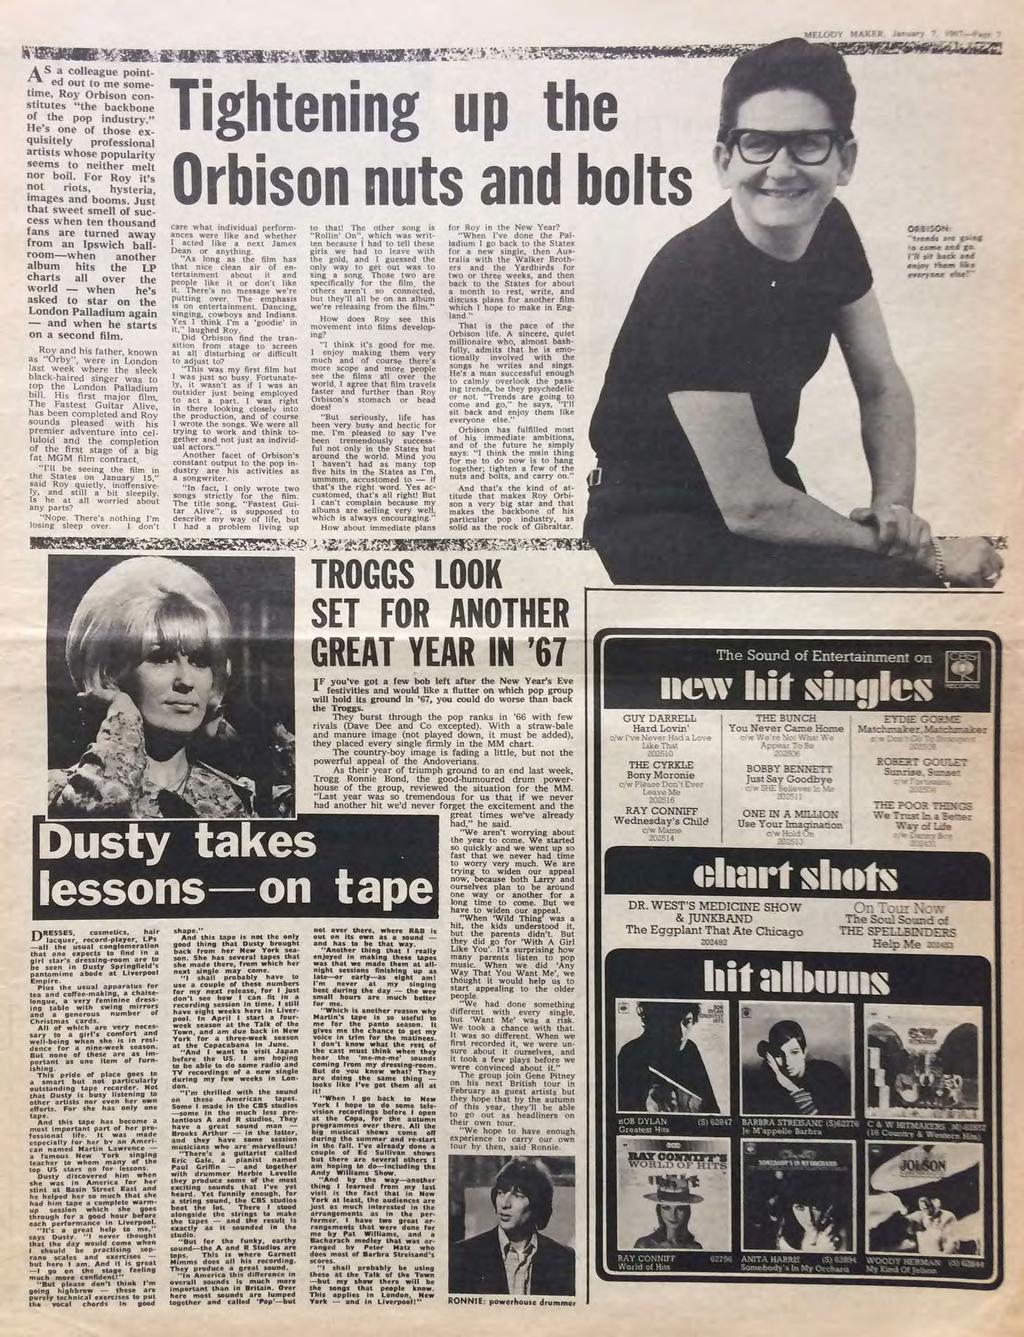 AS collegue pointed out to me sometime, Roy Orbison constitutes " bckbone of pop industry" He's one of those exquisitely professionl rtists whose populrity seems to neir melt nor boil For Roy it's